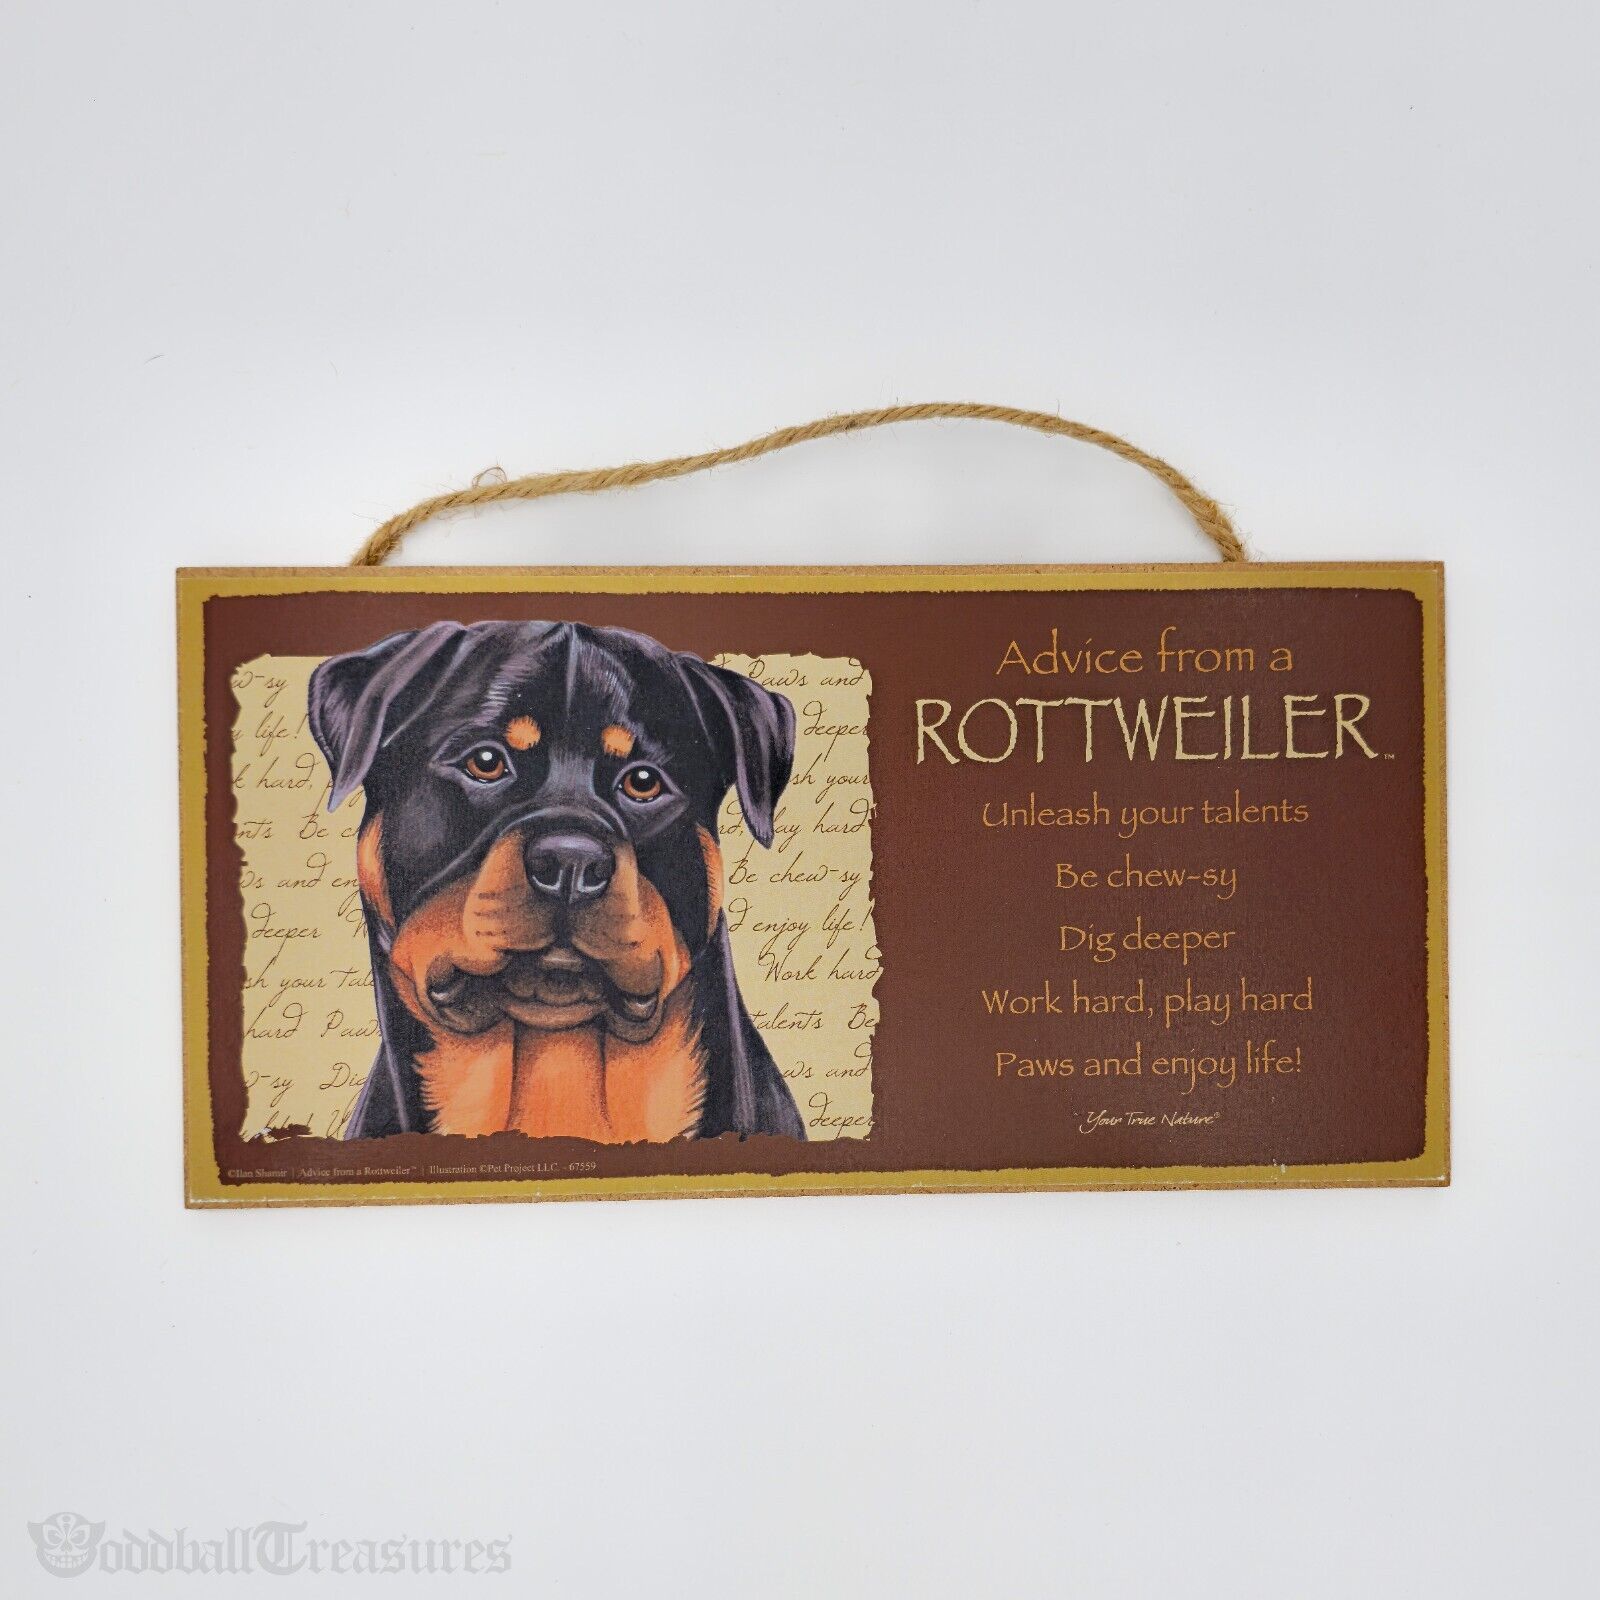 Advice from a ROTTWEILER - 5 X 10 hanging Wood Sign made in the USA